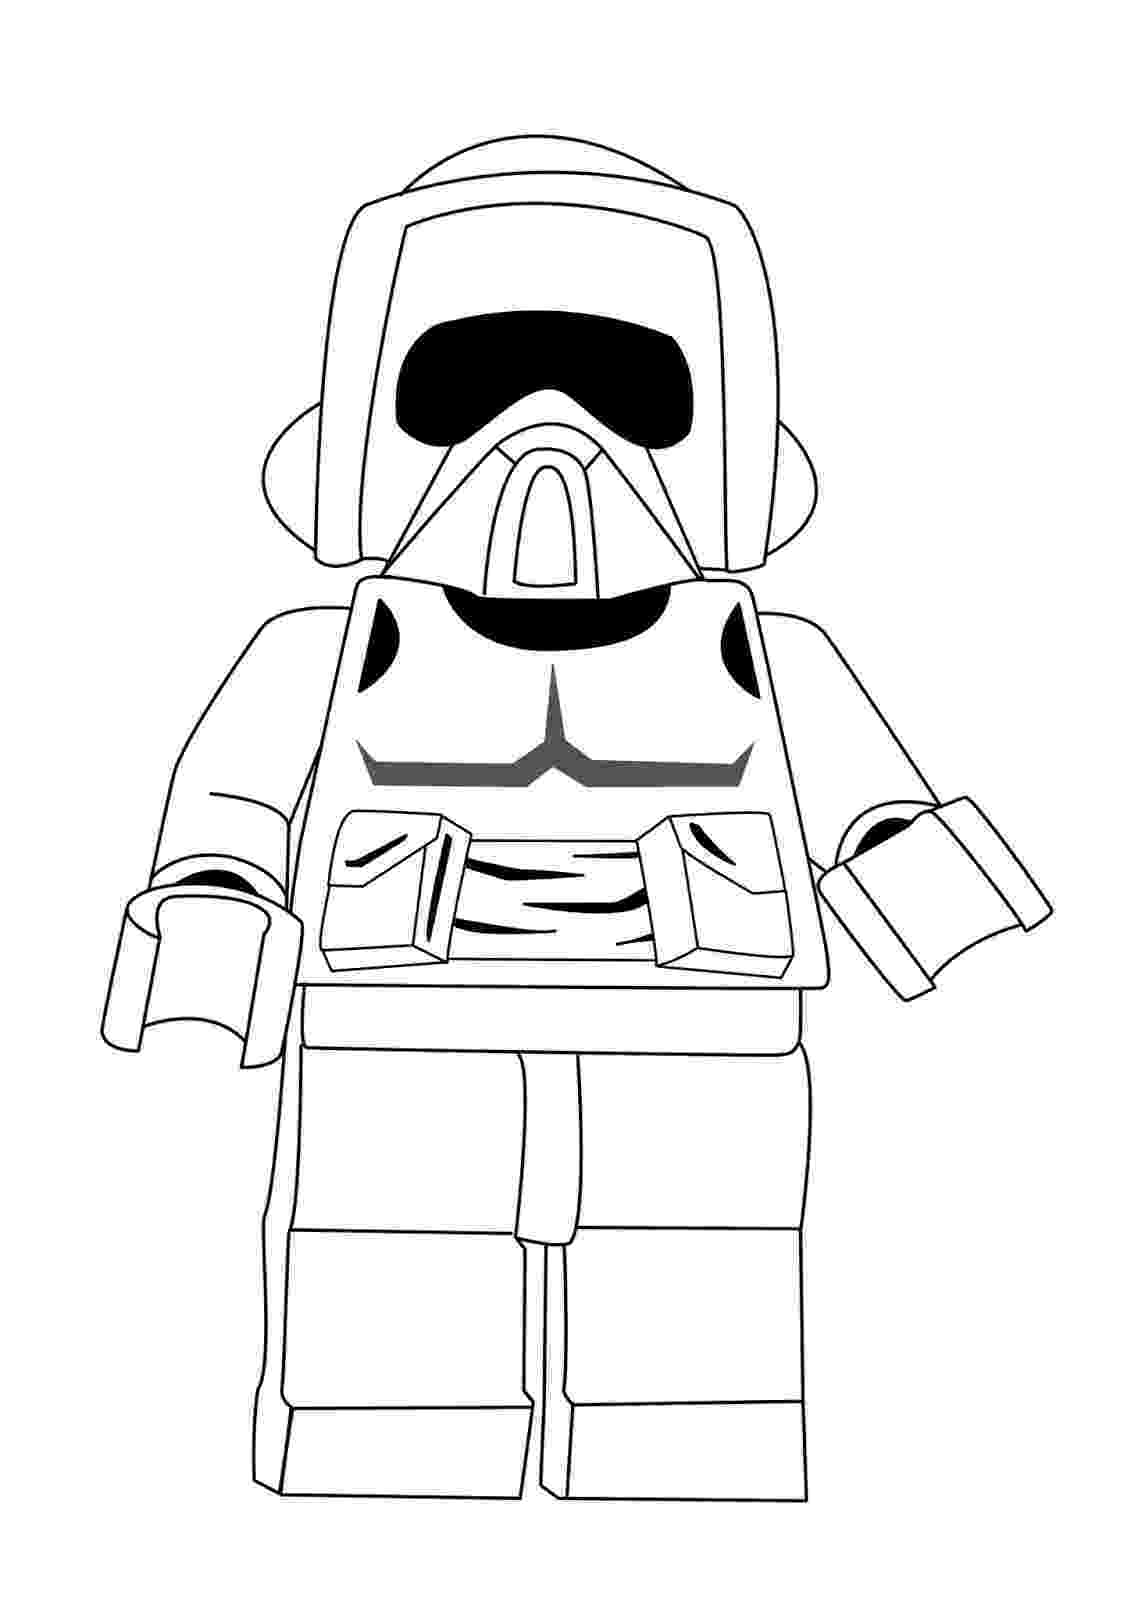 lego star wars coloring sheet lego star wars coloring pages the freemaker adventures wars sheet lego star coloring 